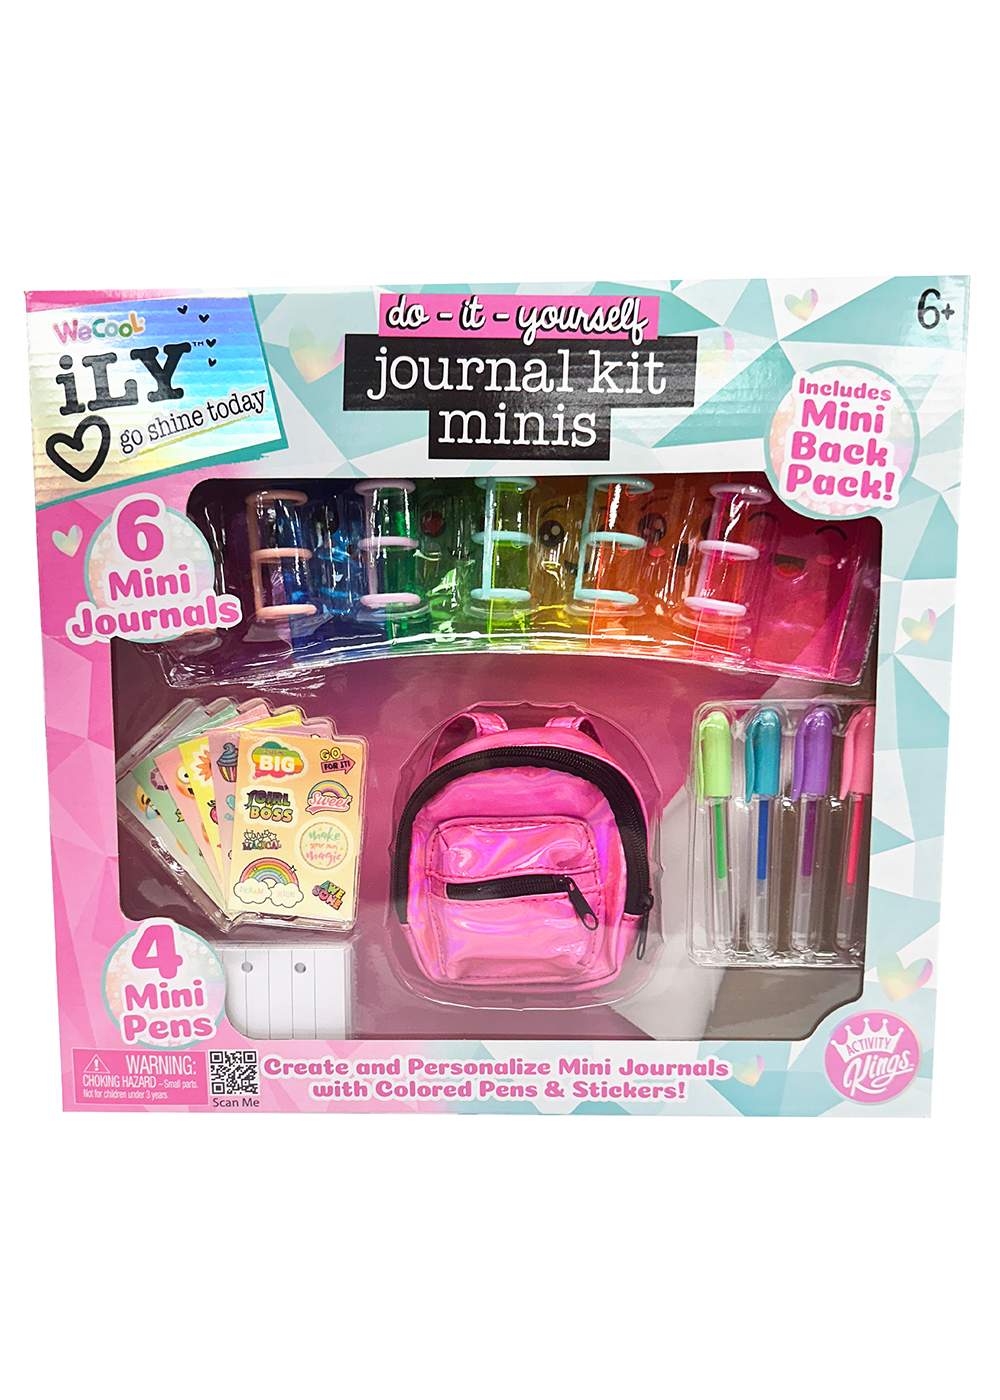 ILY Do-It-Yourself Journal Kit Minis; image 1 of 2